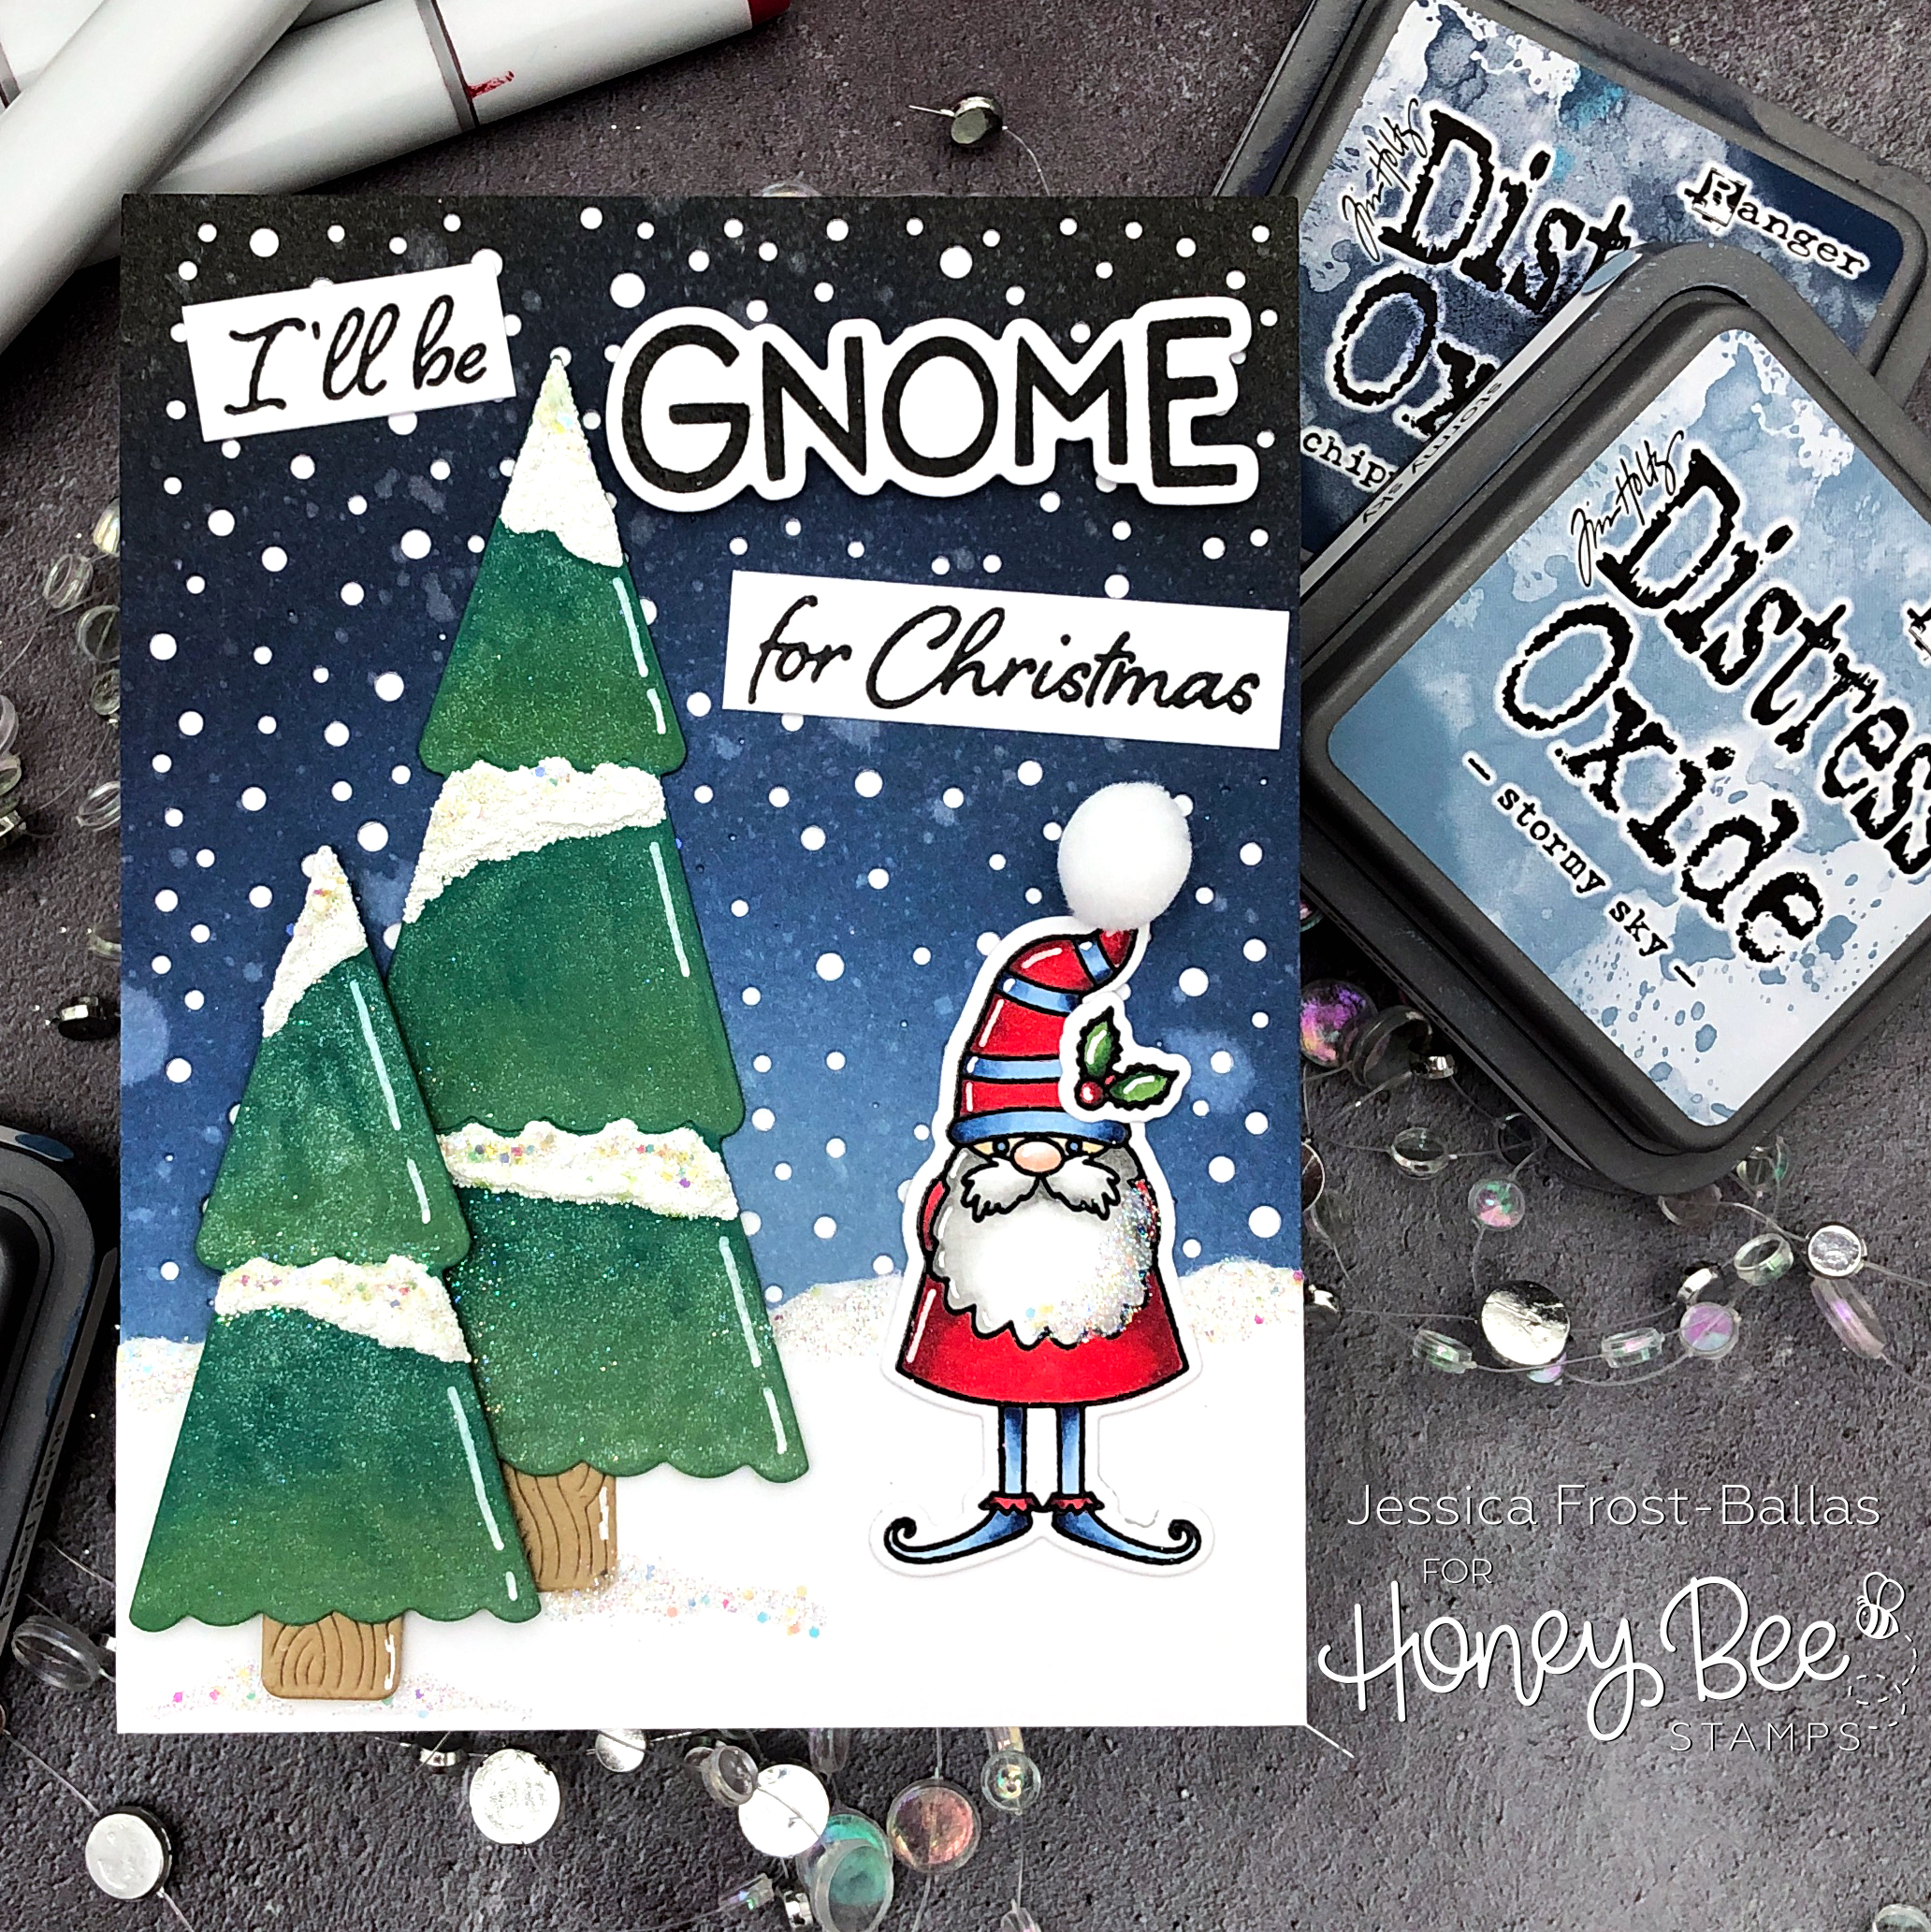 I'll Be Gnome for the Holidays by Jessica Frost-Ballas for Honey Bee Stamps